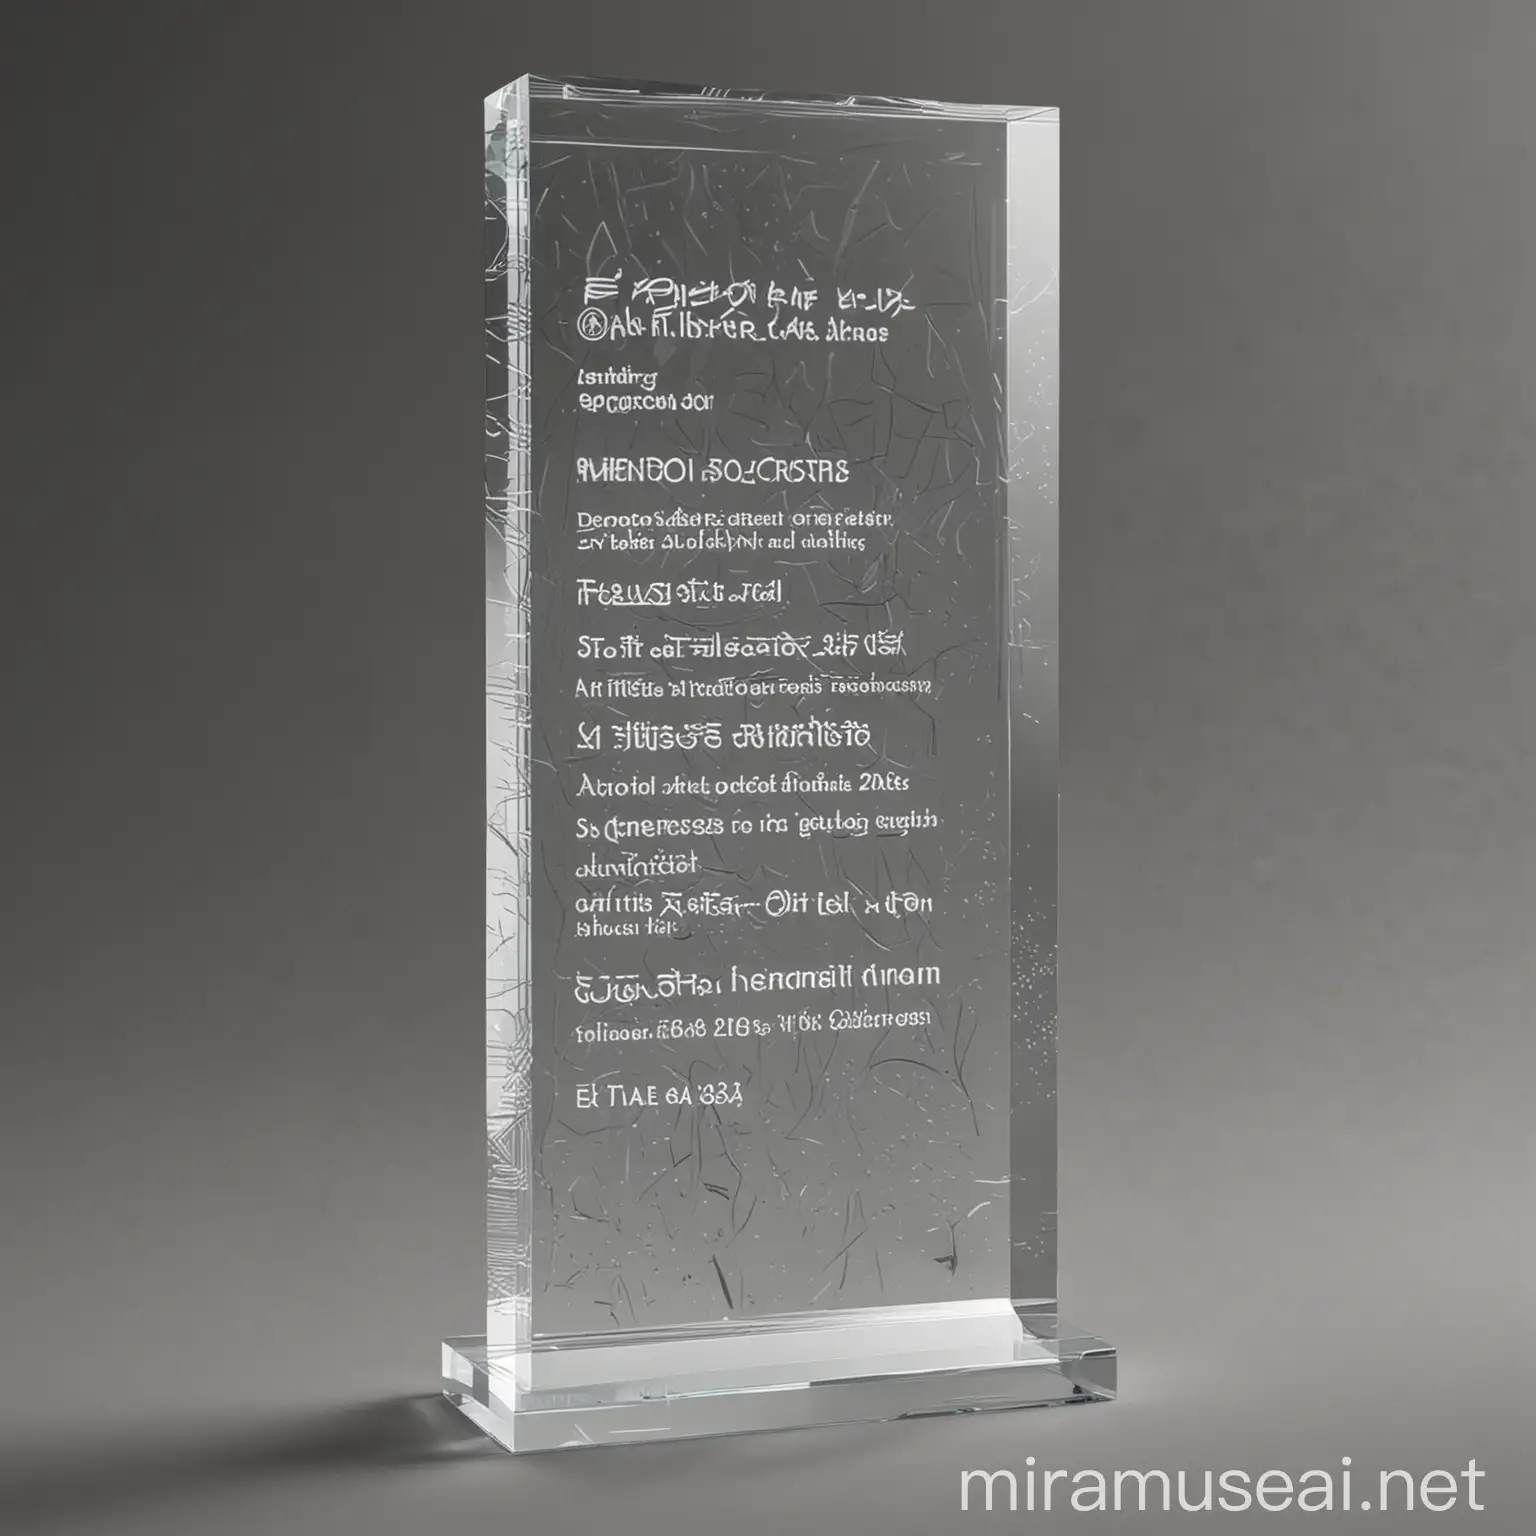 this is an architectural glass award. I want you to remake it with glass texture with an engraved text on the glass pedestal part wich says this : Építészeti alkotás Pro architectura 2024